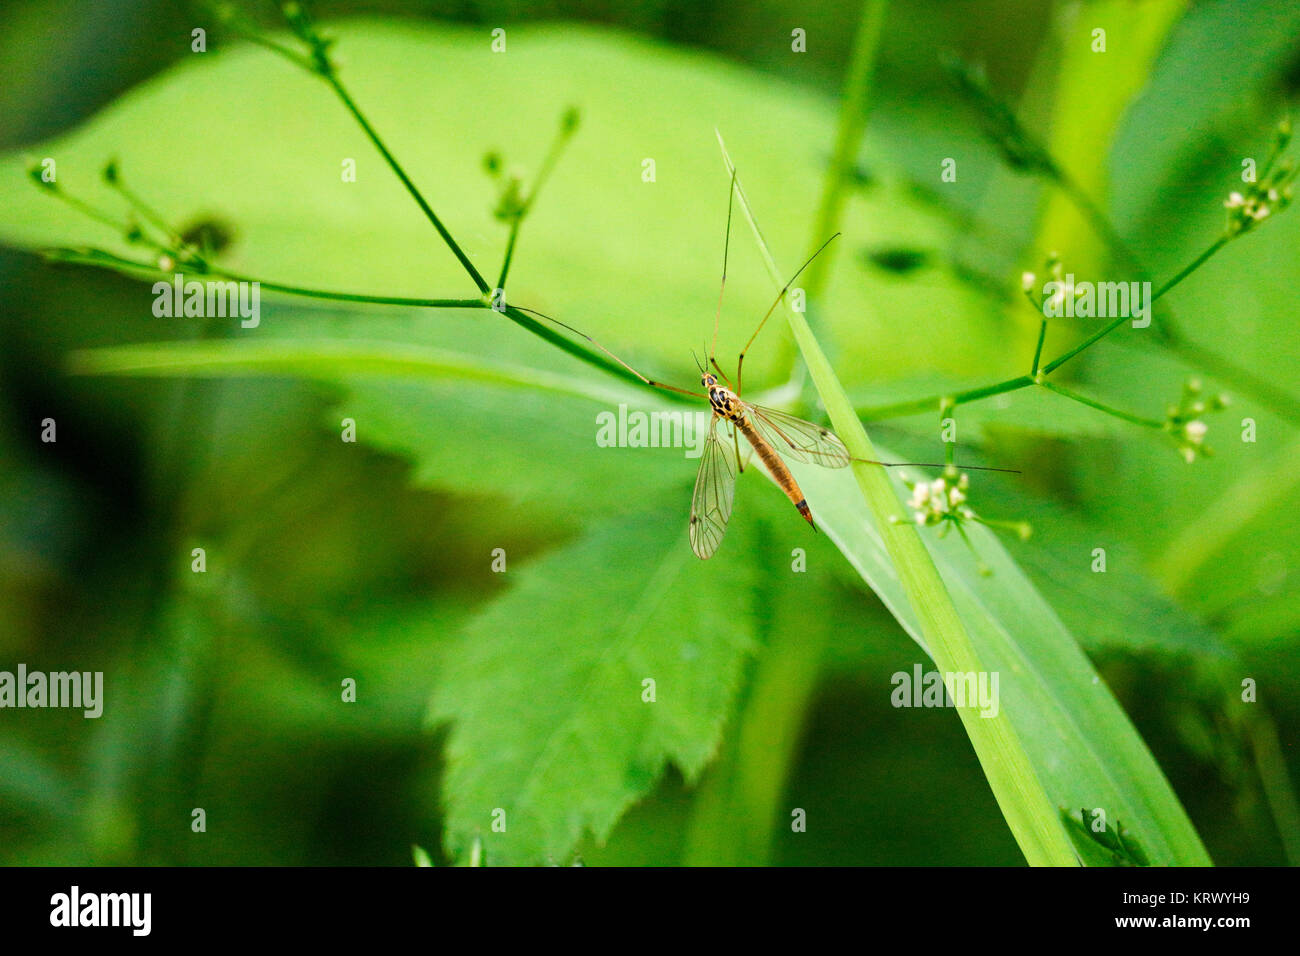 Spotted crane fly. Stock Photo